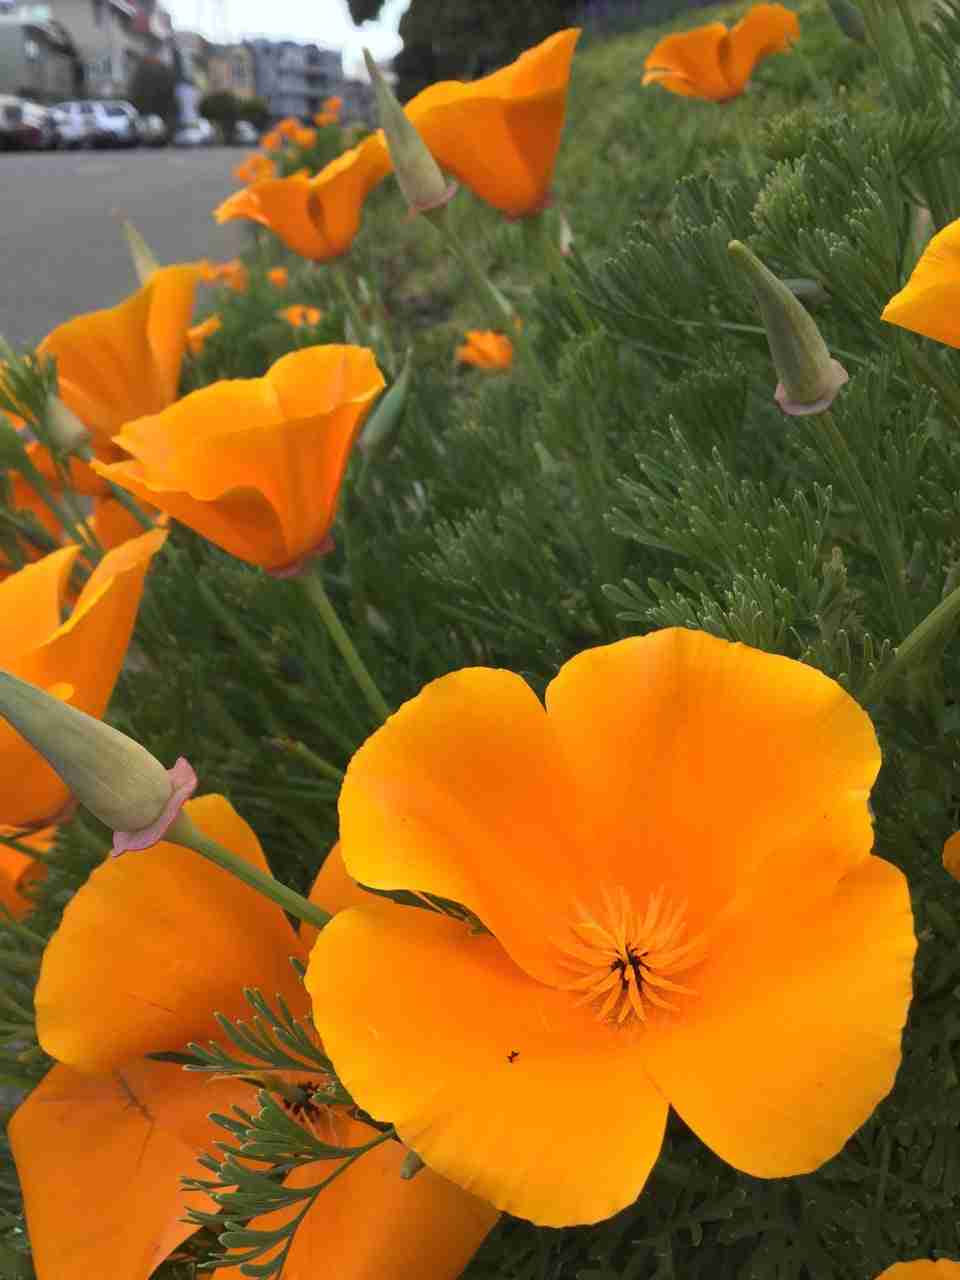 California golden poppies in full bloom on the side of a hill and receding into the distance, next to a street with cars parked on the other side of it, blurry from the distance.